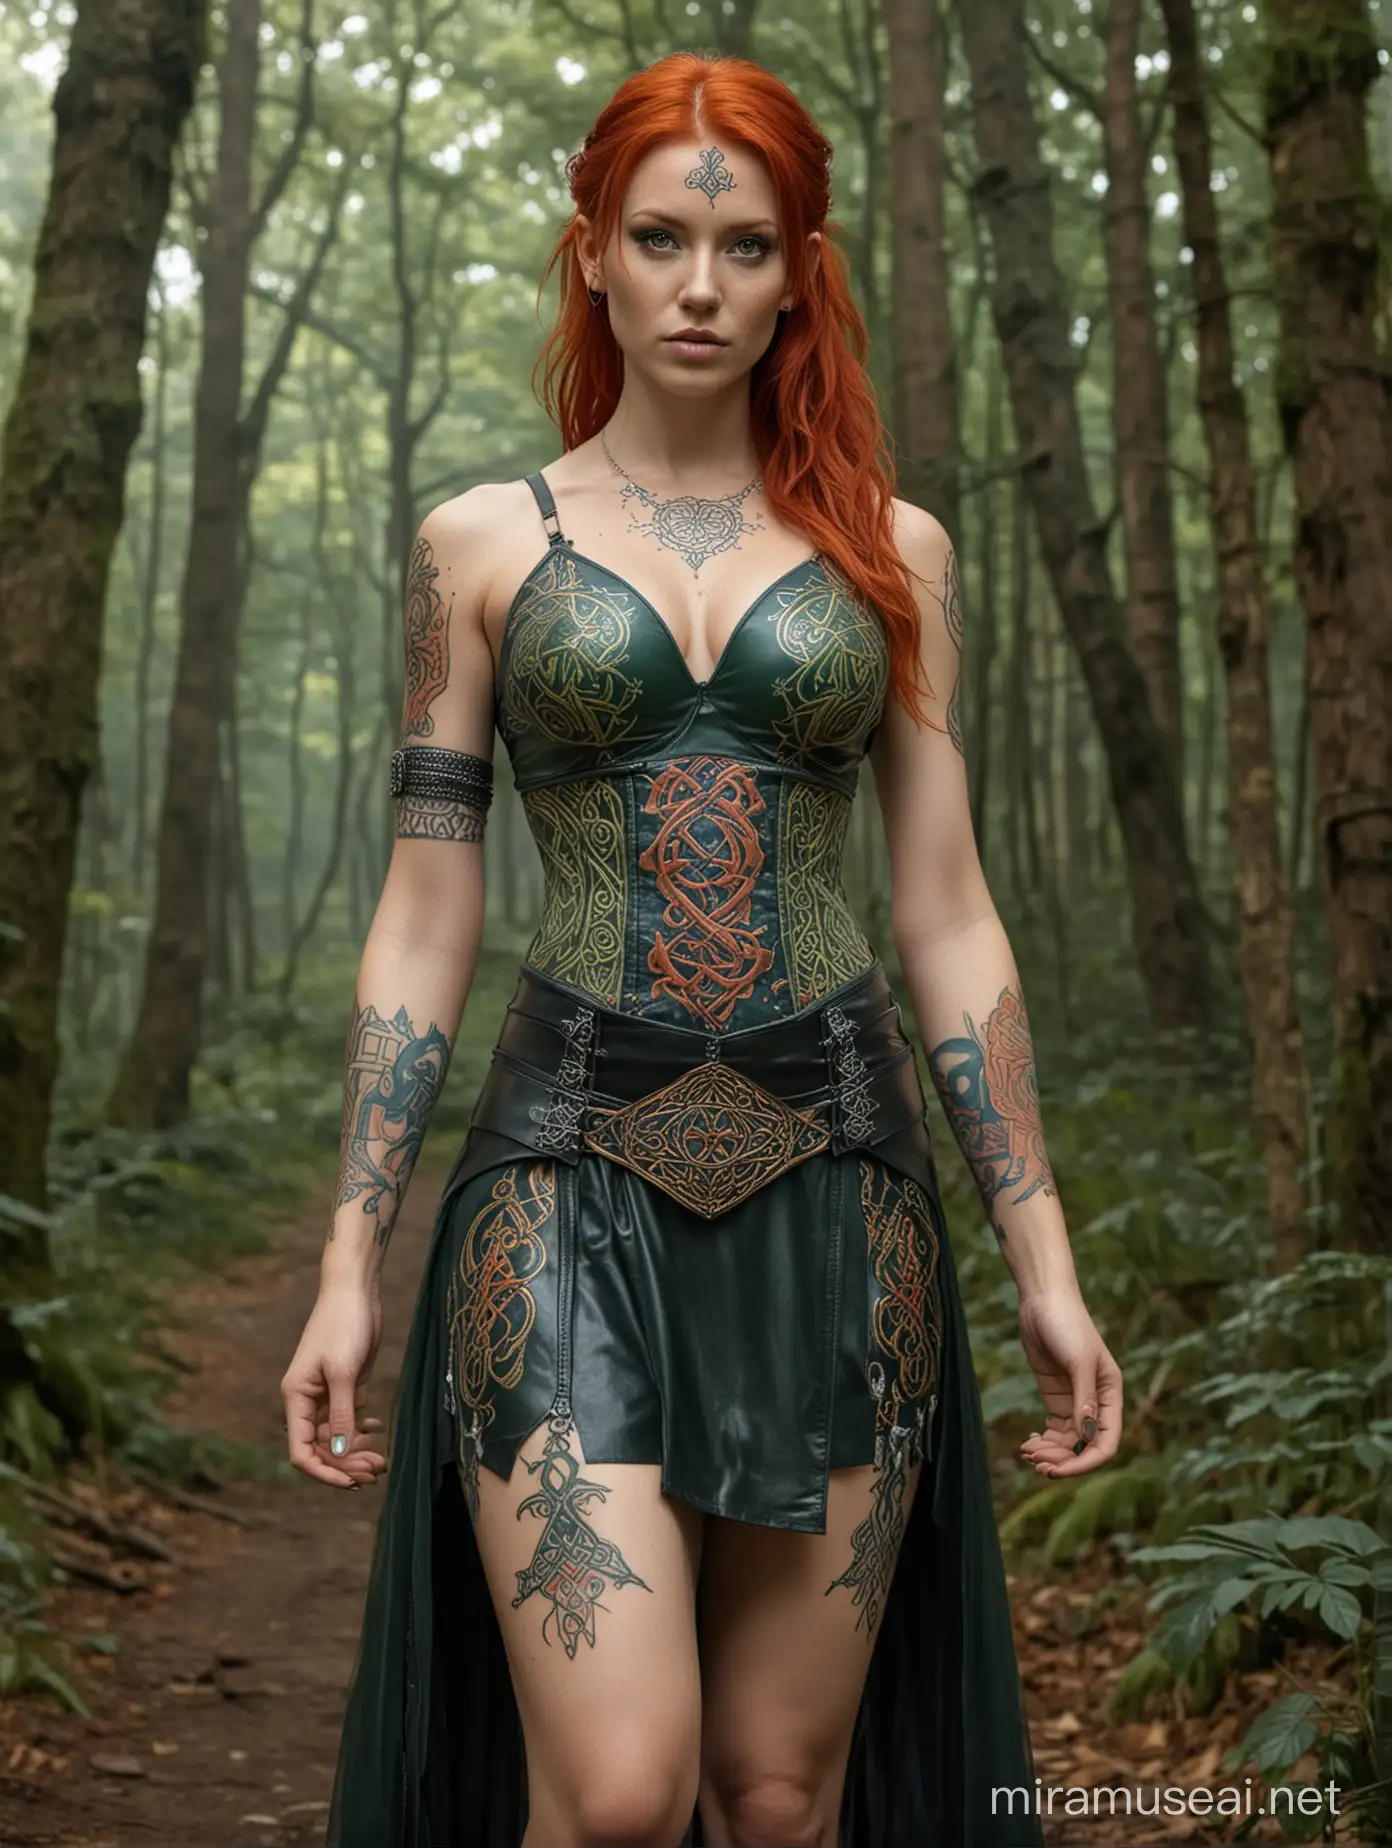 ultrarealistic high detail full body long shot showing an anatomically correct female with fiery red hair decorated with silver, colourful draconic symbols tattooed on arms, wearing a small sheer green sleeveless showing big greasts, open front leather top engraved with celtic runes in gold, with a loose short blue skirt embroided with colourful elven symbols, sitting in a forest